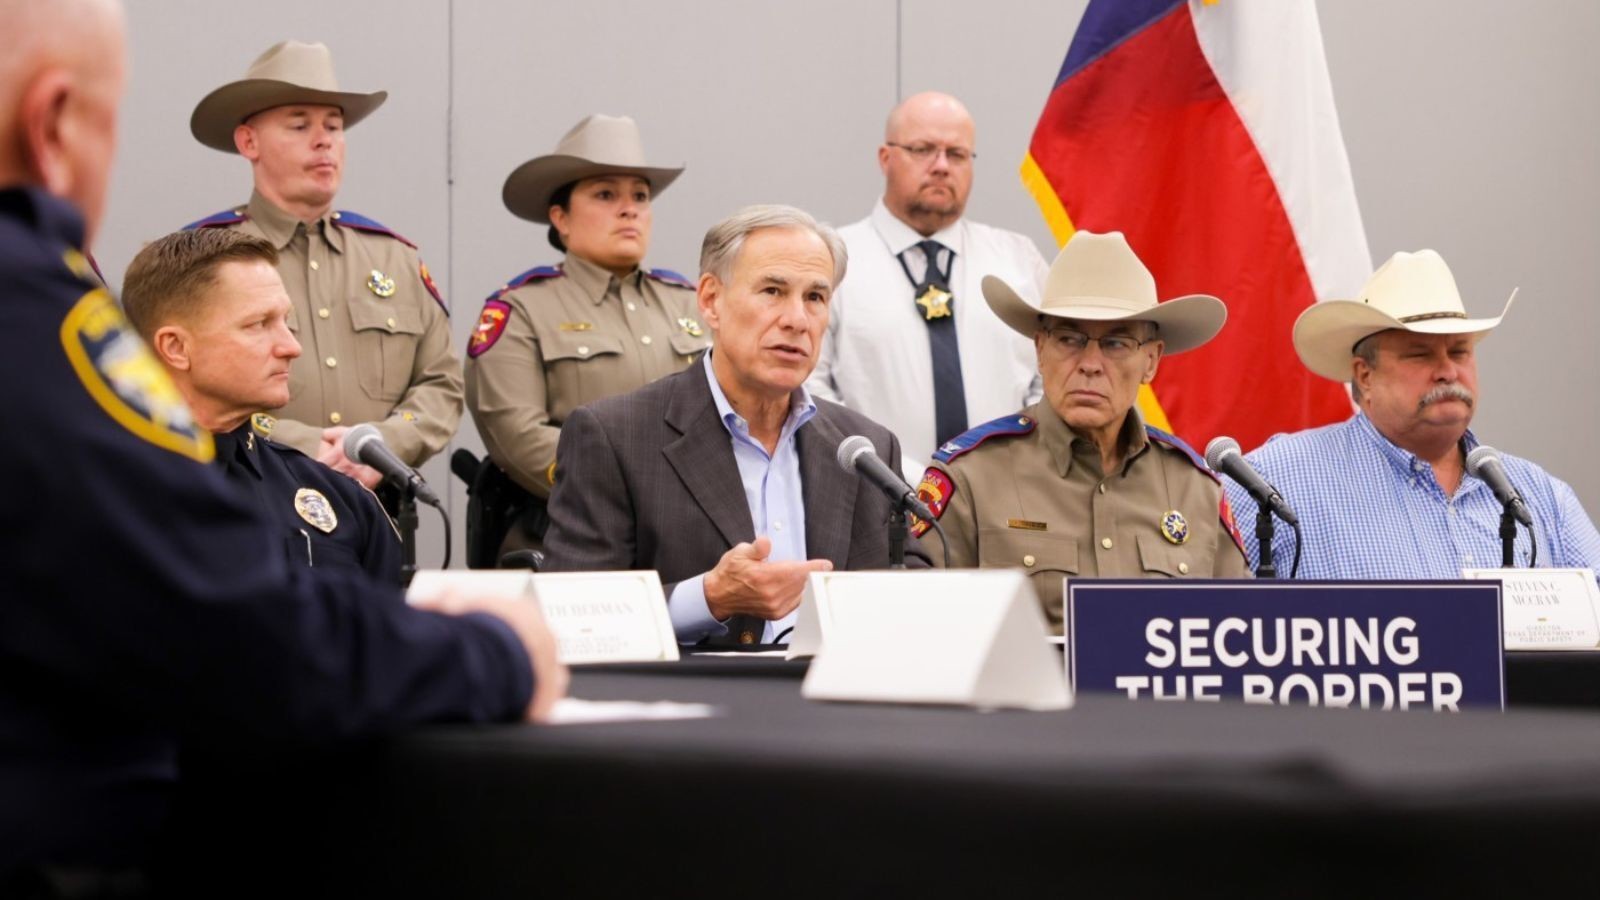 Texas Gov. Abbott: 'Cartels are terrorists, and it’s time we treated them that way'